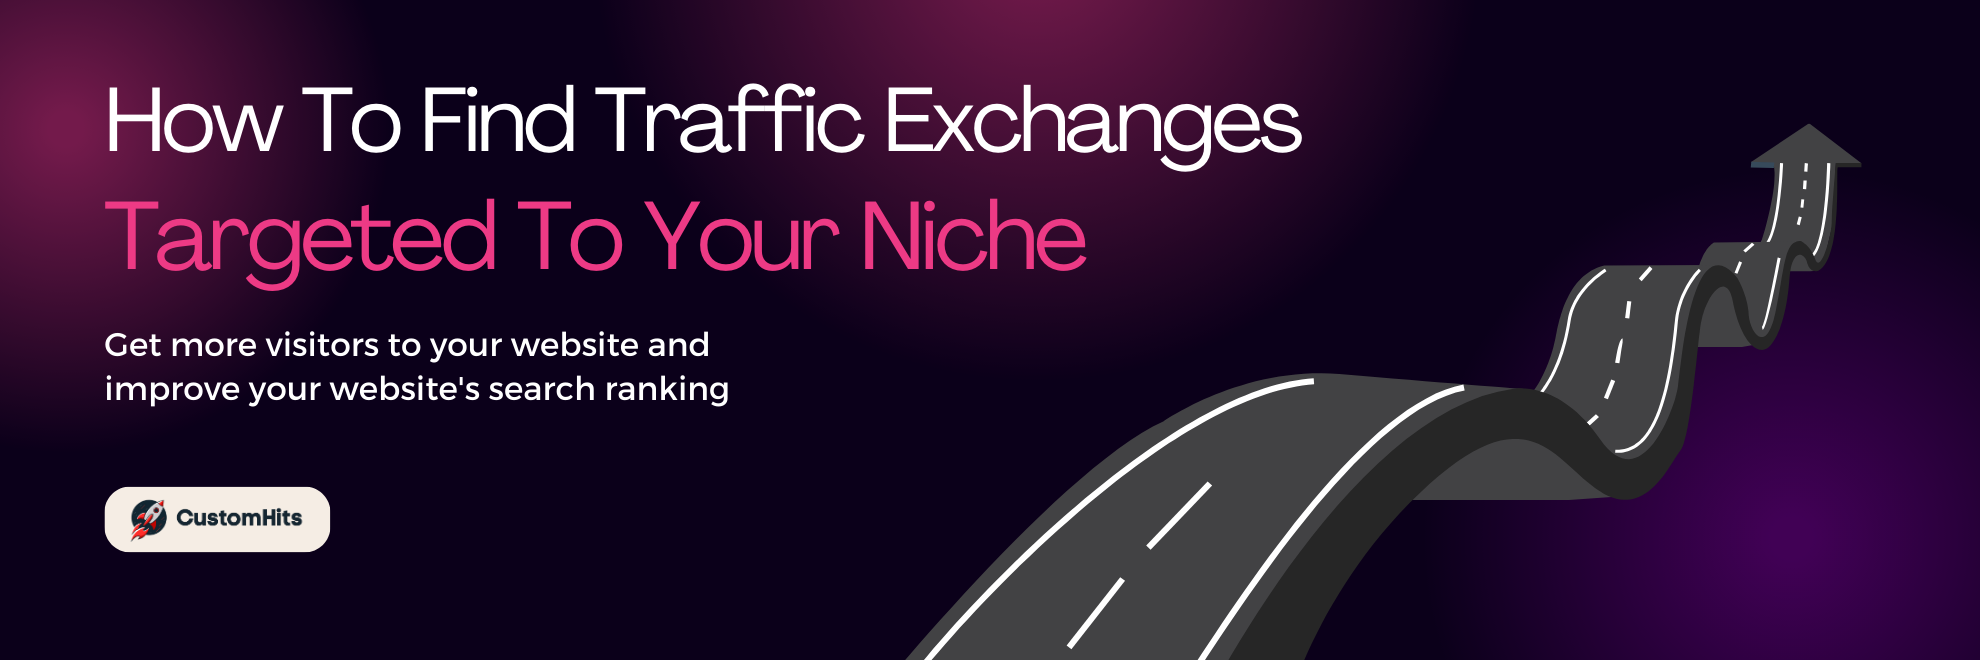 How To Find Traffic Exchange Websites In Your Niche